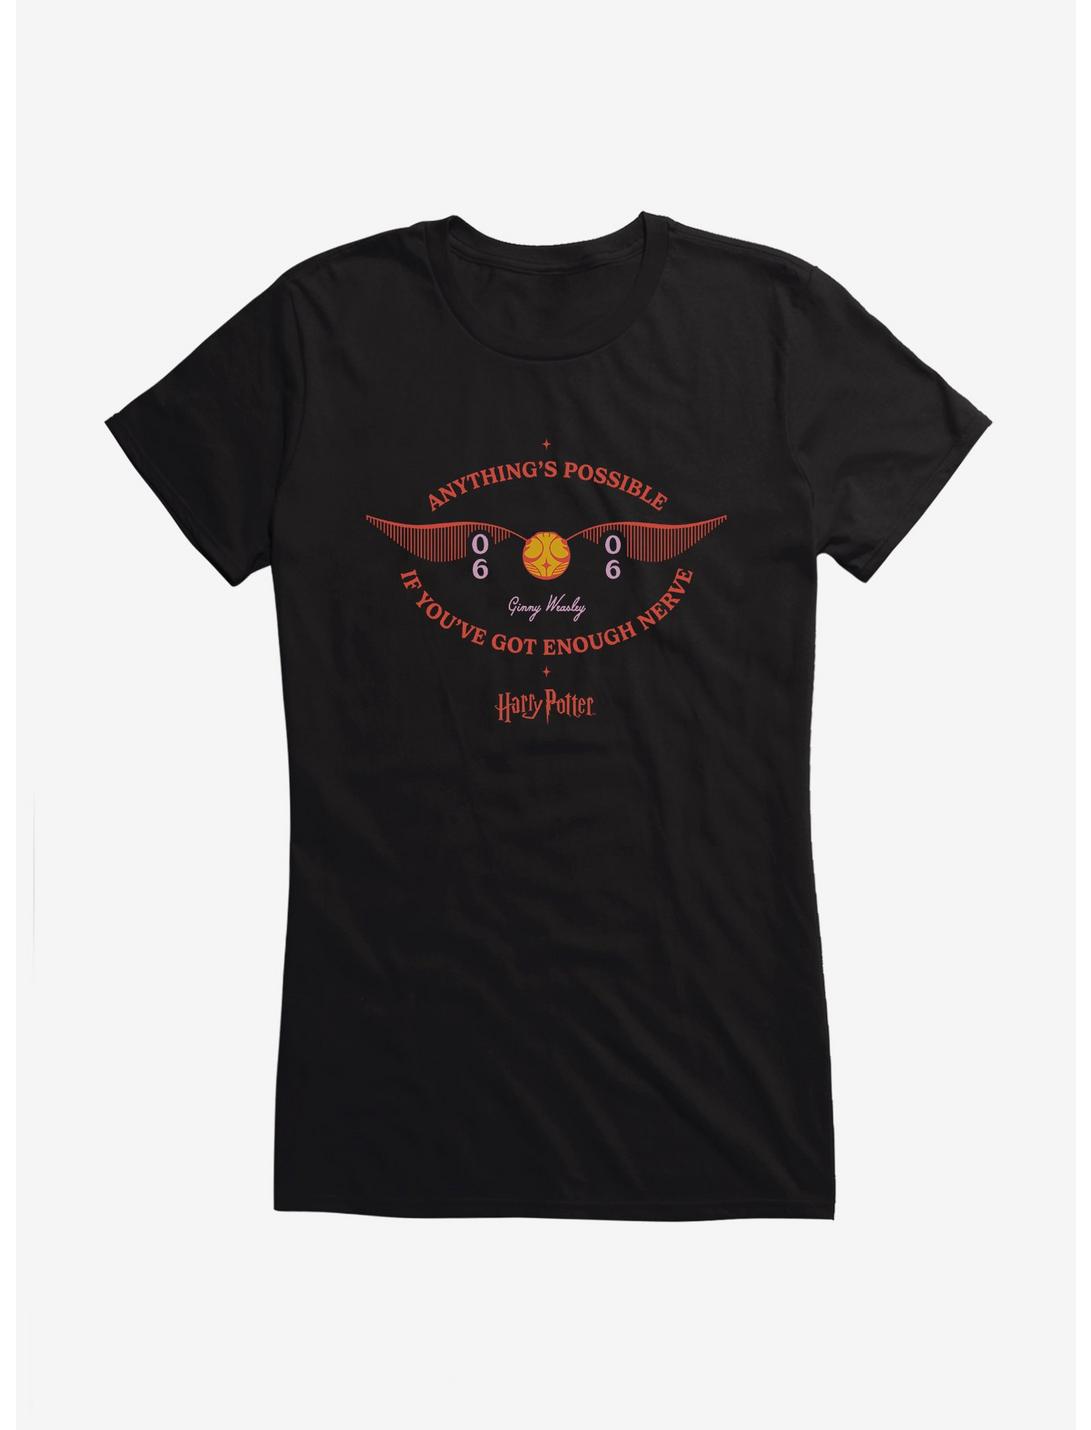 Harry Potter Anything's Possible Golden Snitch Girls T-Shirt, , hi-res